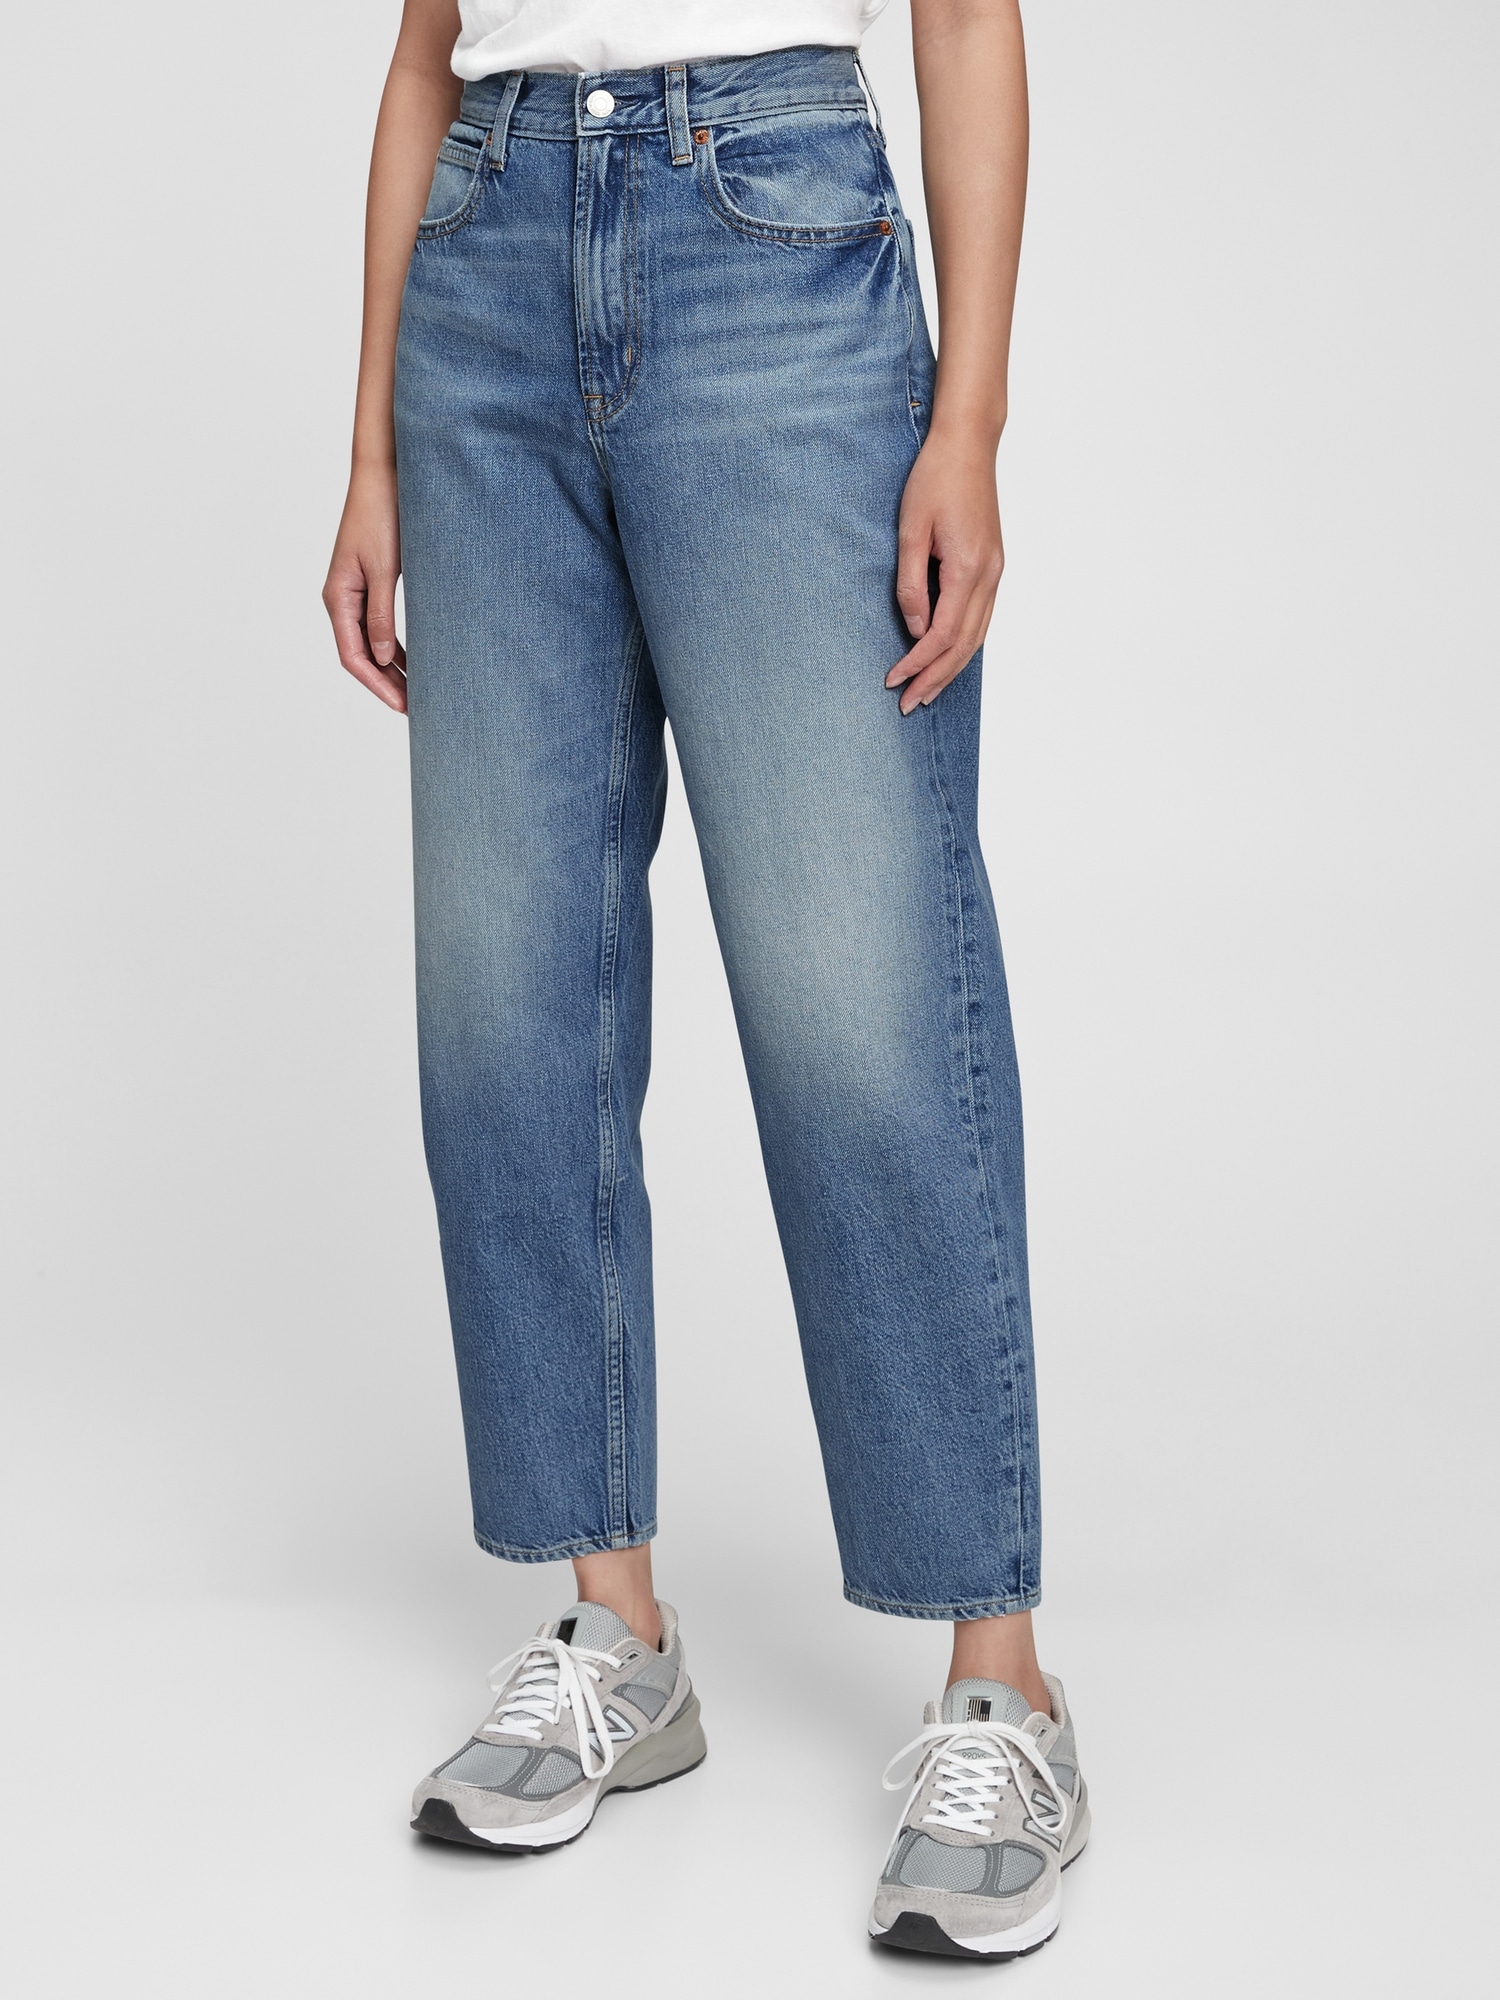 High Rise Barrel Jeans with Washwell | Gap